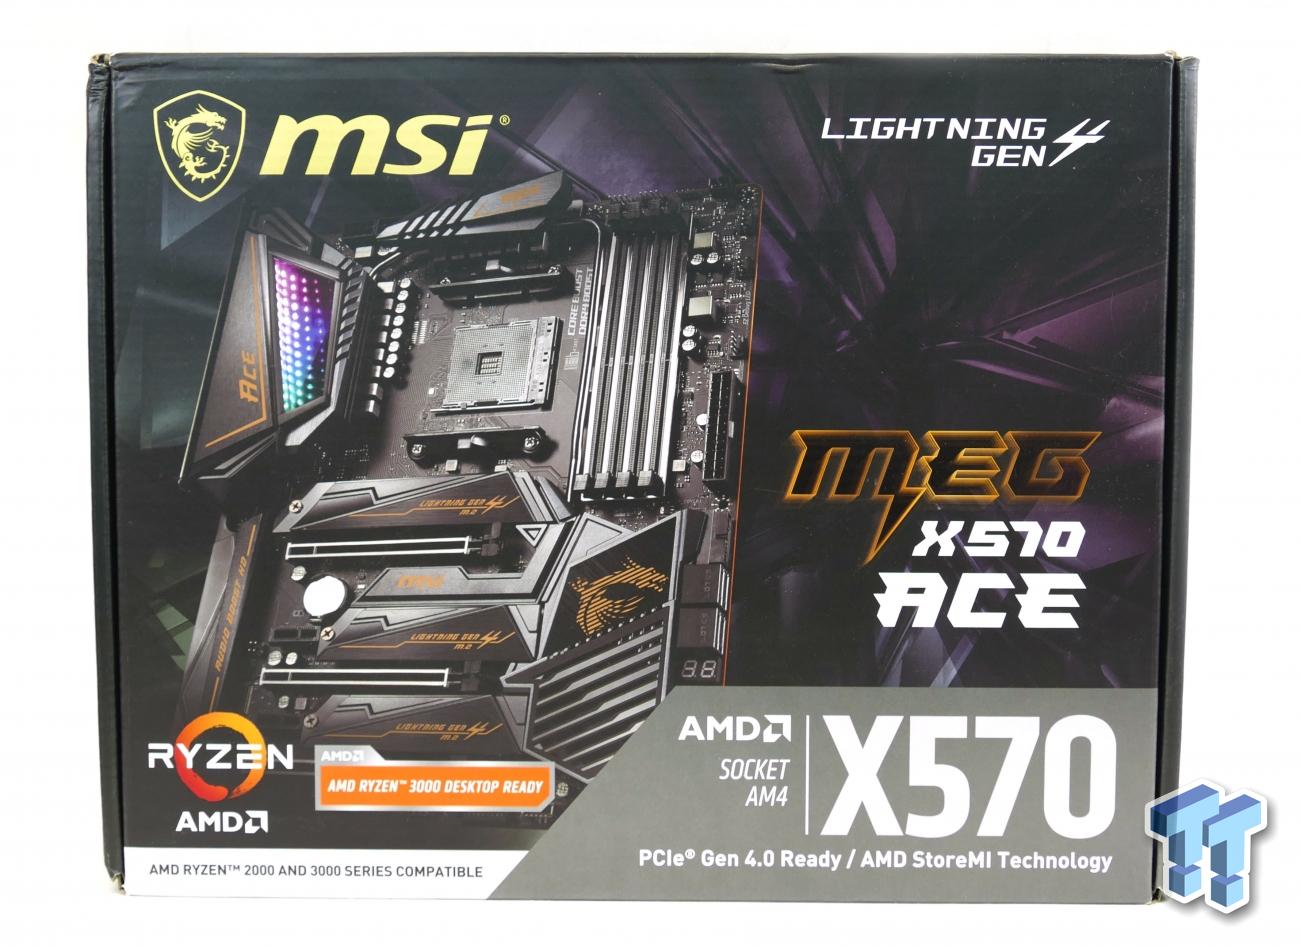 MSI MEG X570 ACE (AMD X570) Motherboard Review